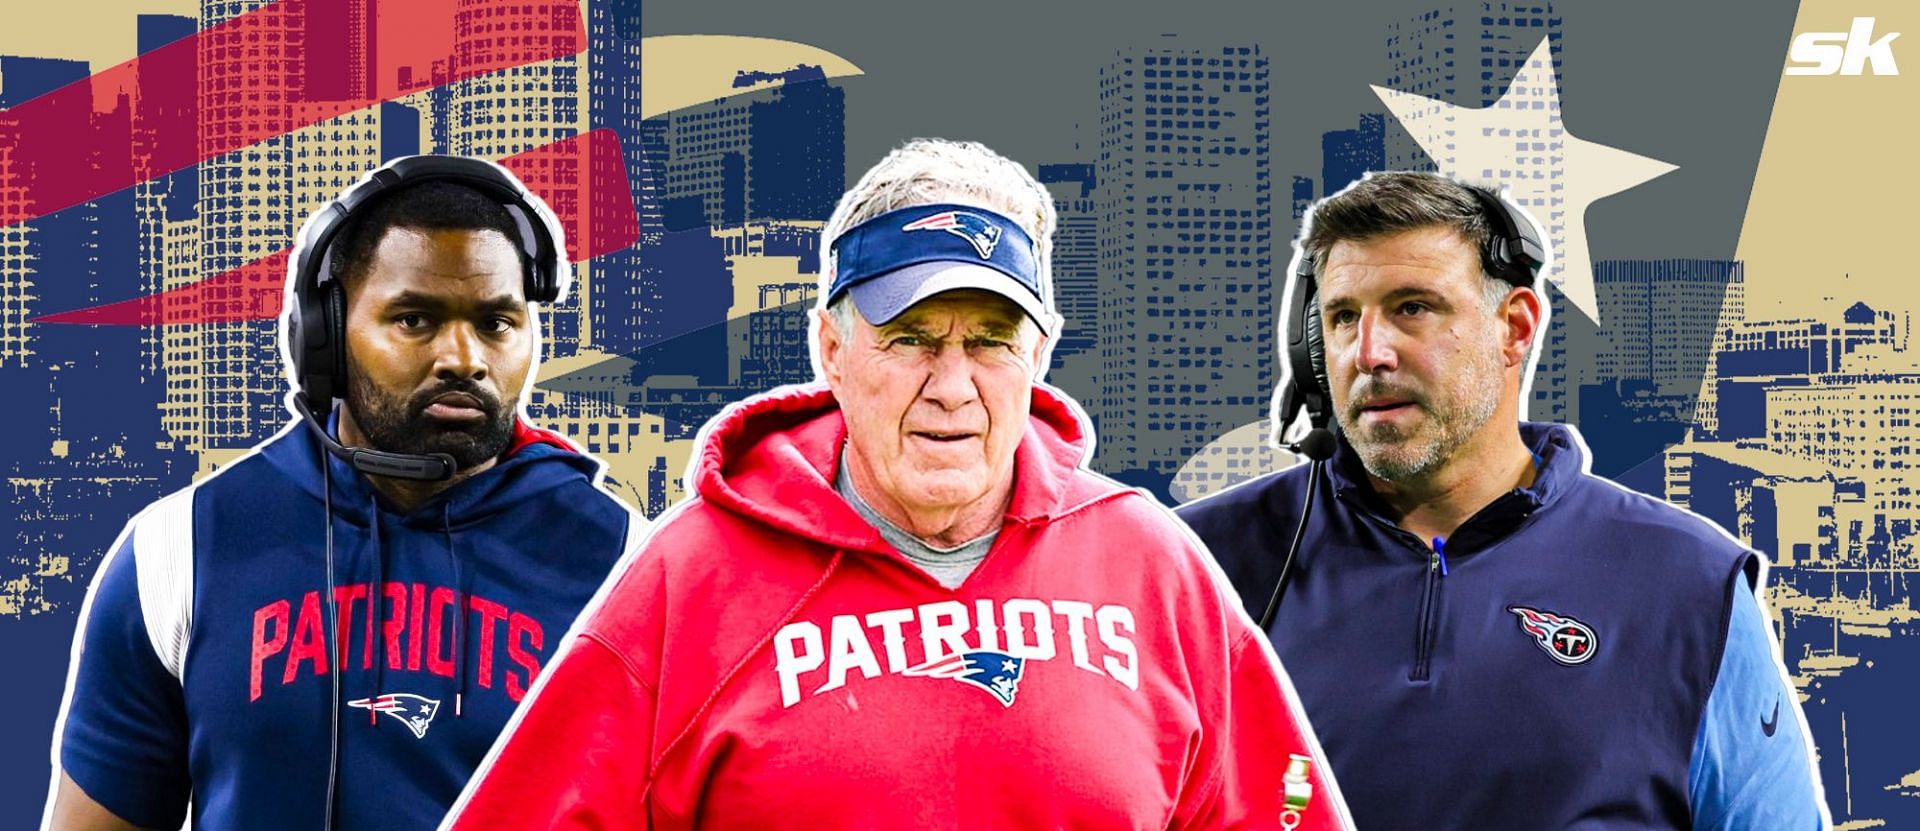 Why didn&rsquo;t Patriots hire Mike Vrabel as Bill Belichick&rsquo;s replacement? Jerod Mayo&rsquo;s case explored